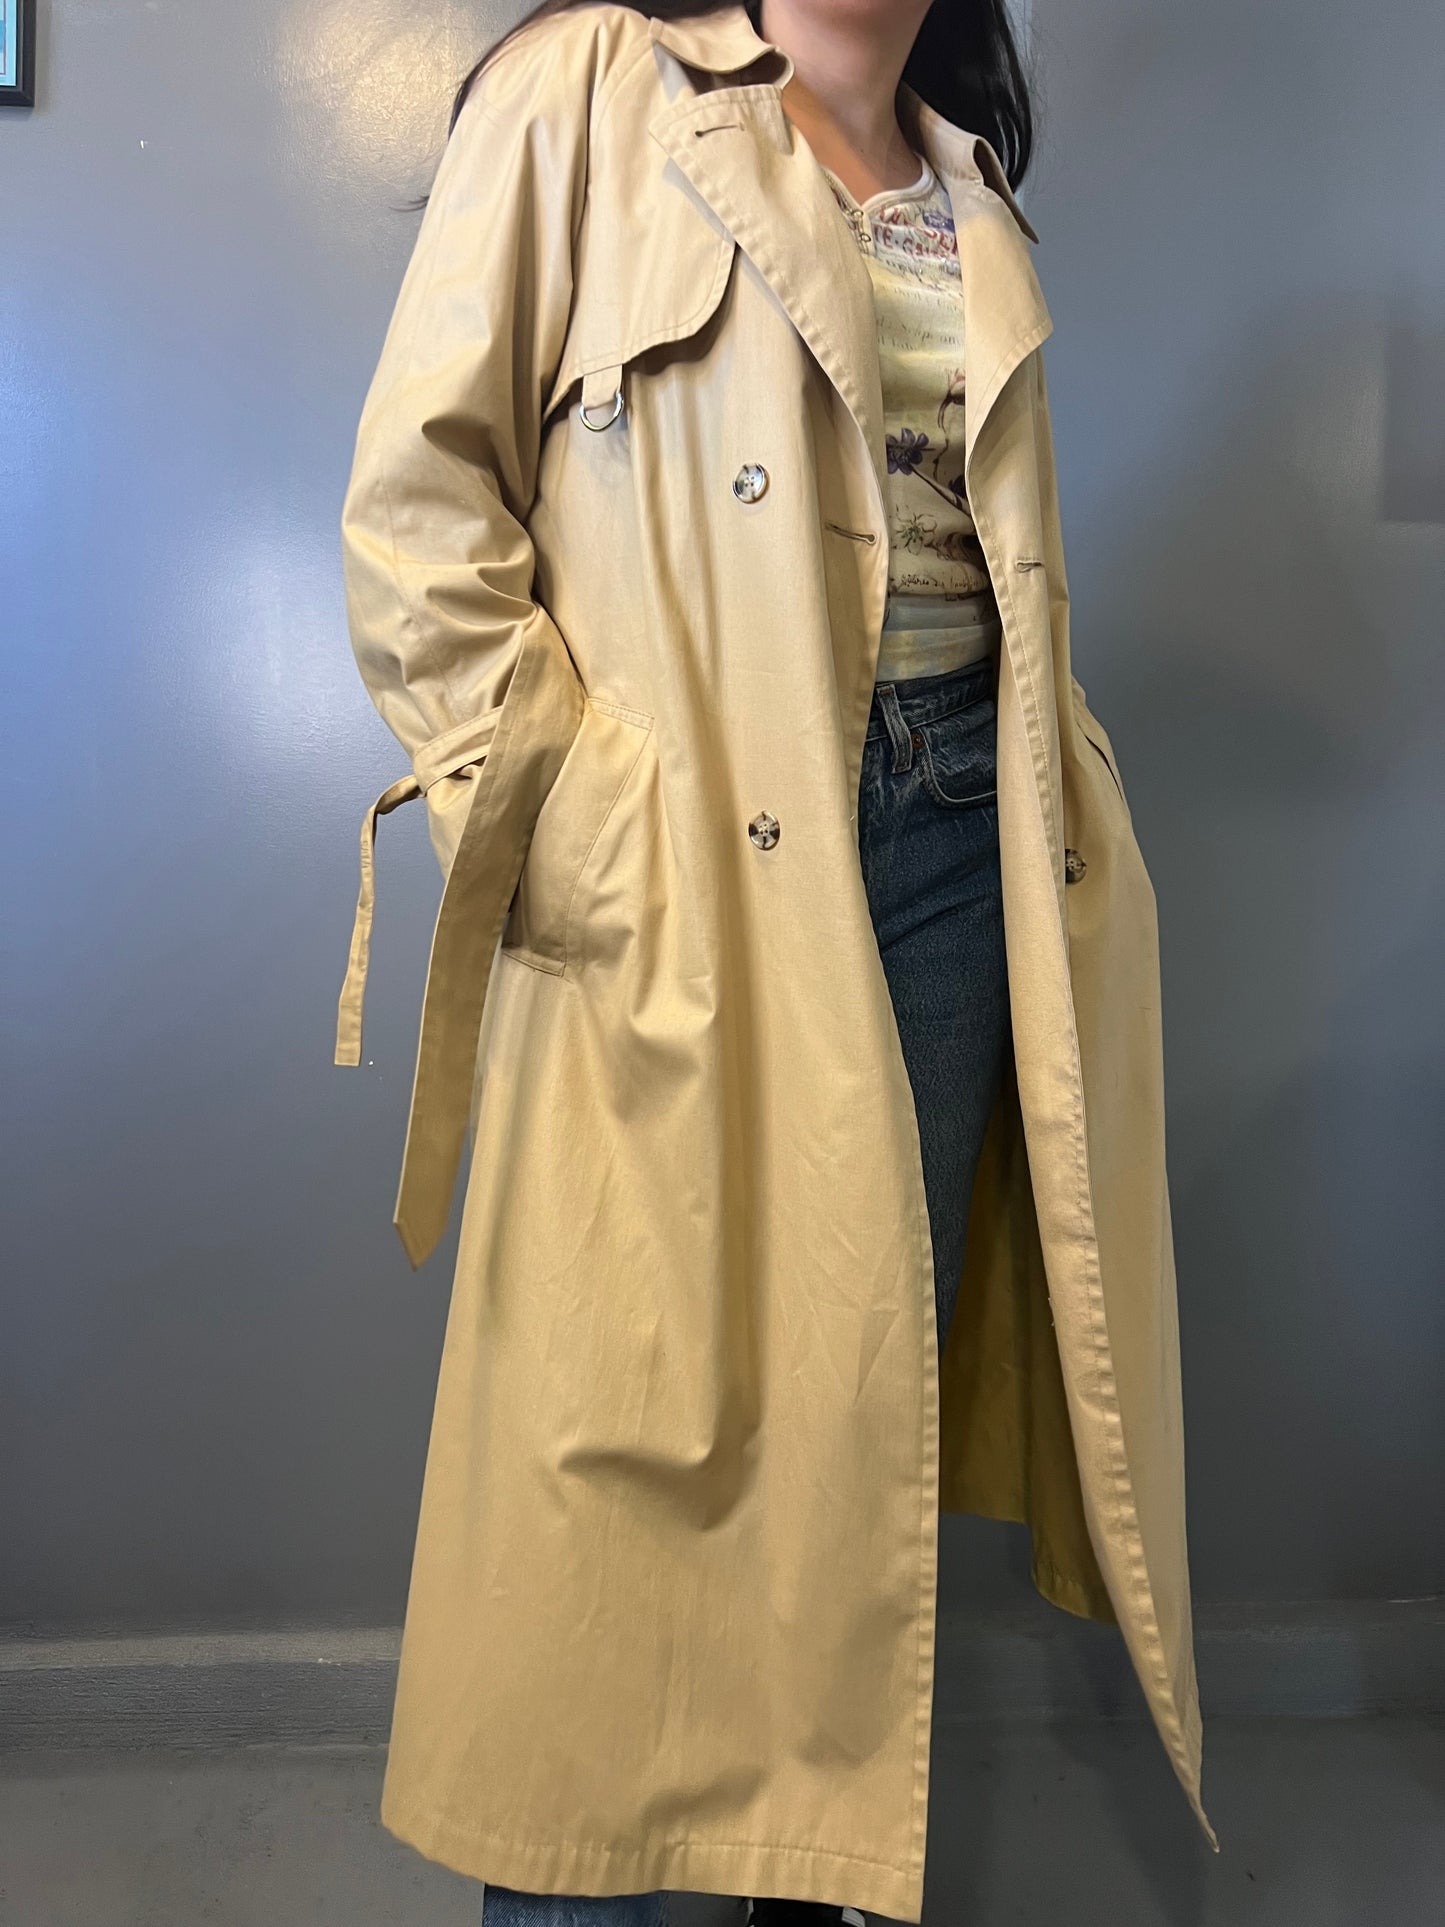 London Fog Double-Breasted Trench Coat - M/L